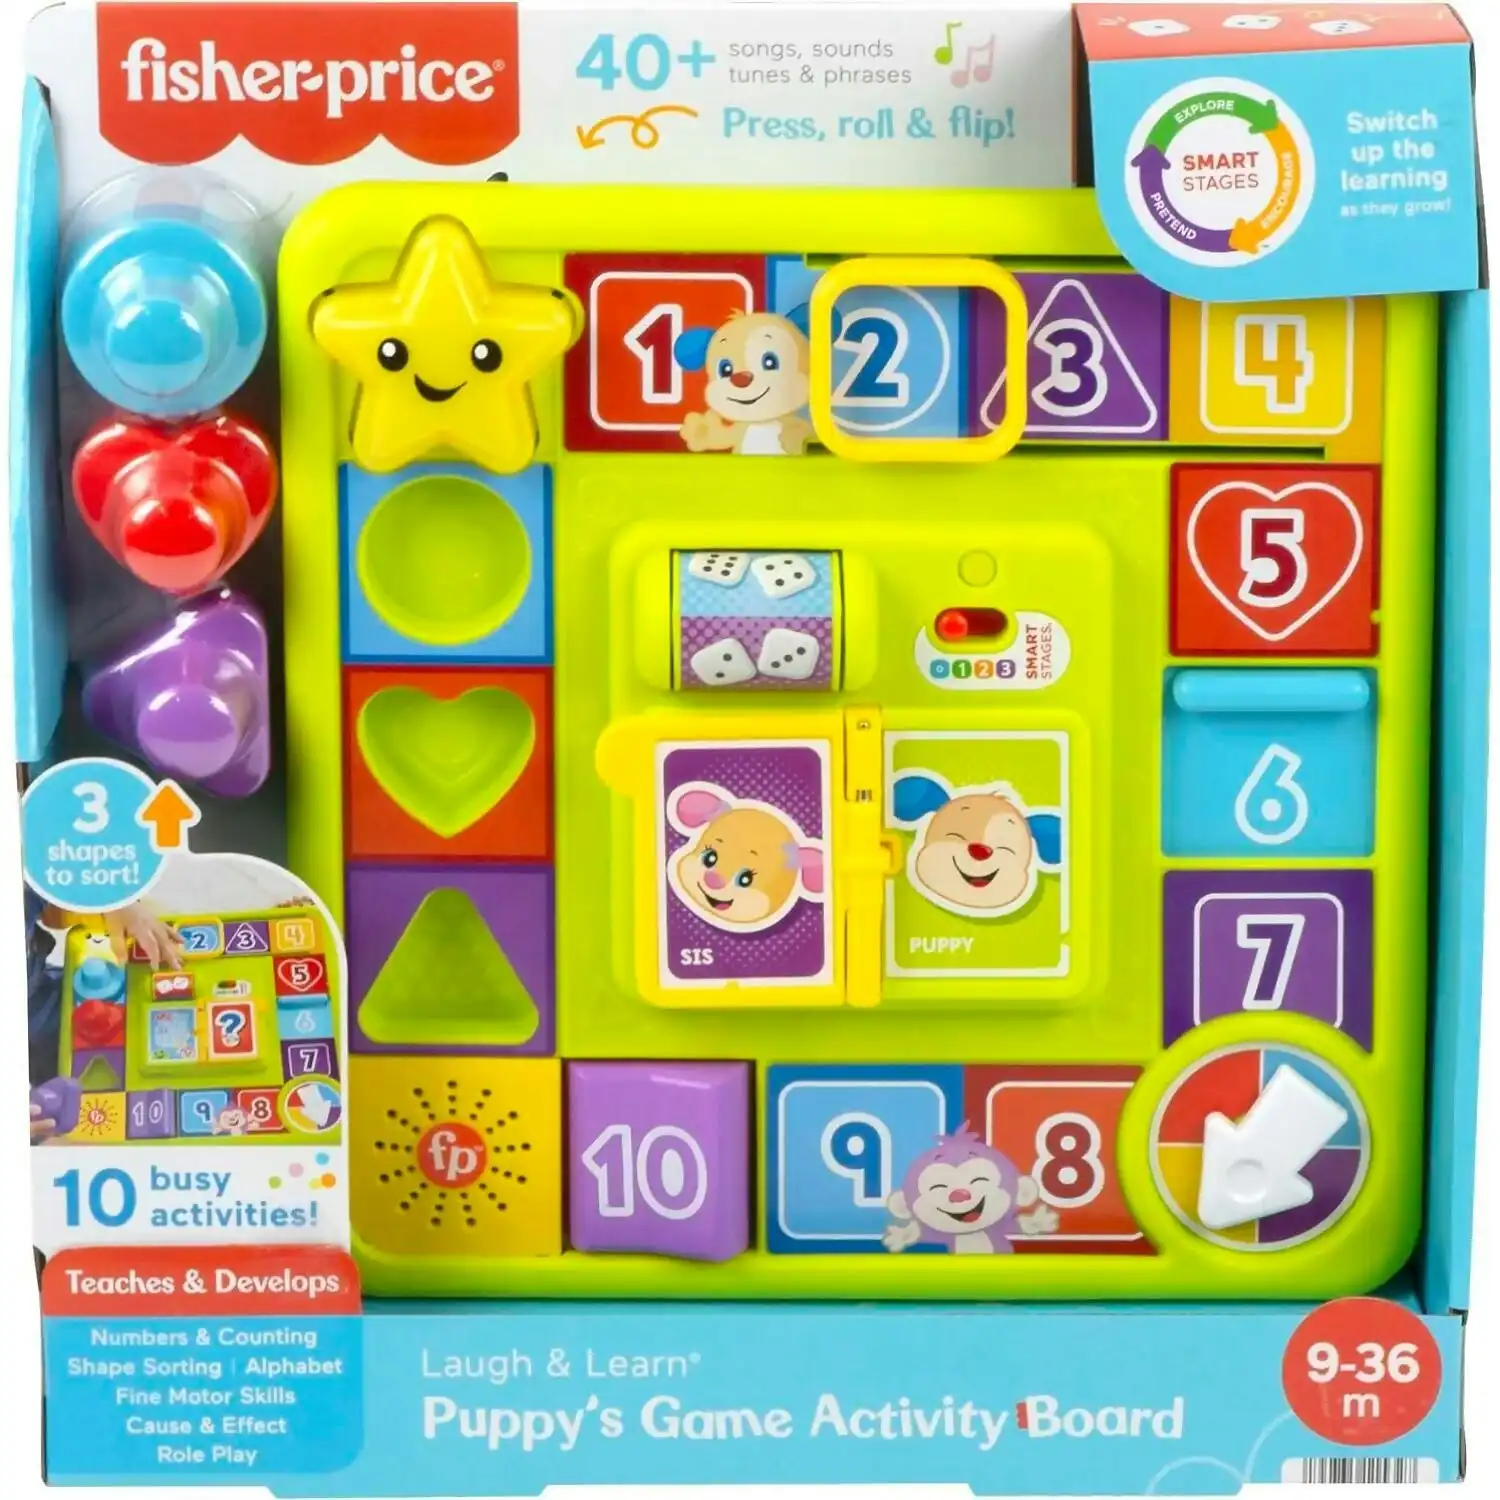 Fisher-price - Laugh & Learn Puppy's Game Activity Board